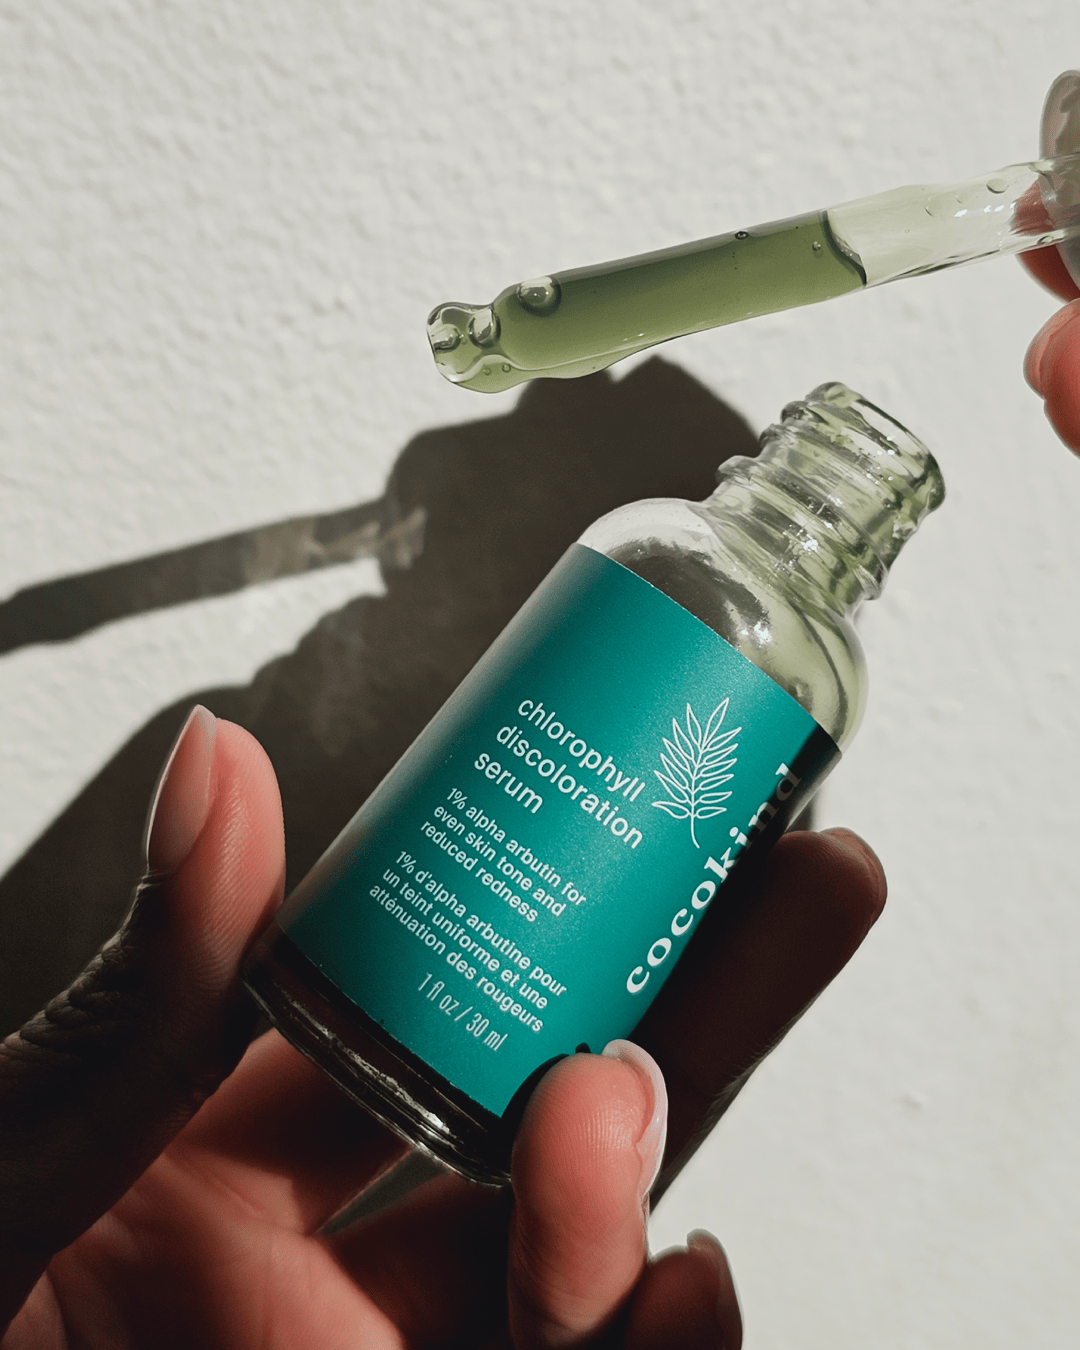 discoloration correcting routine - cocokind